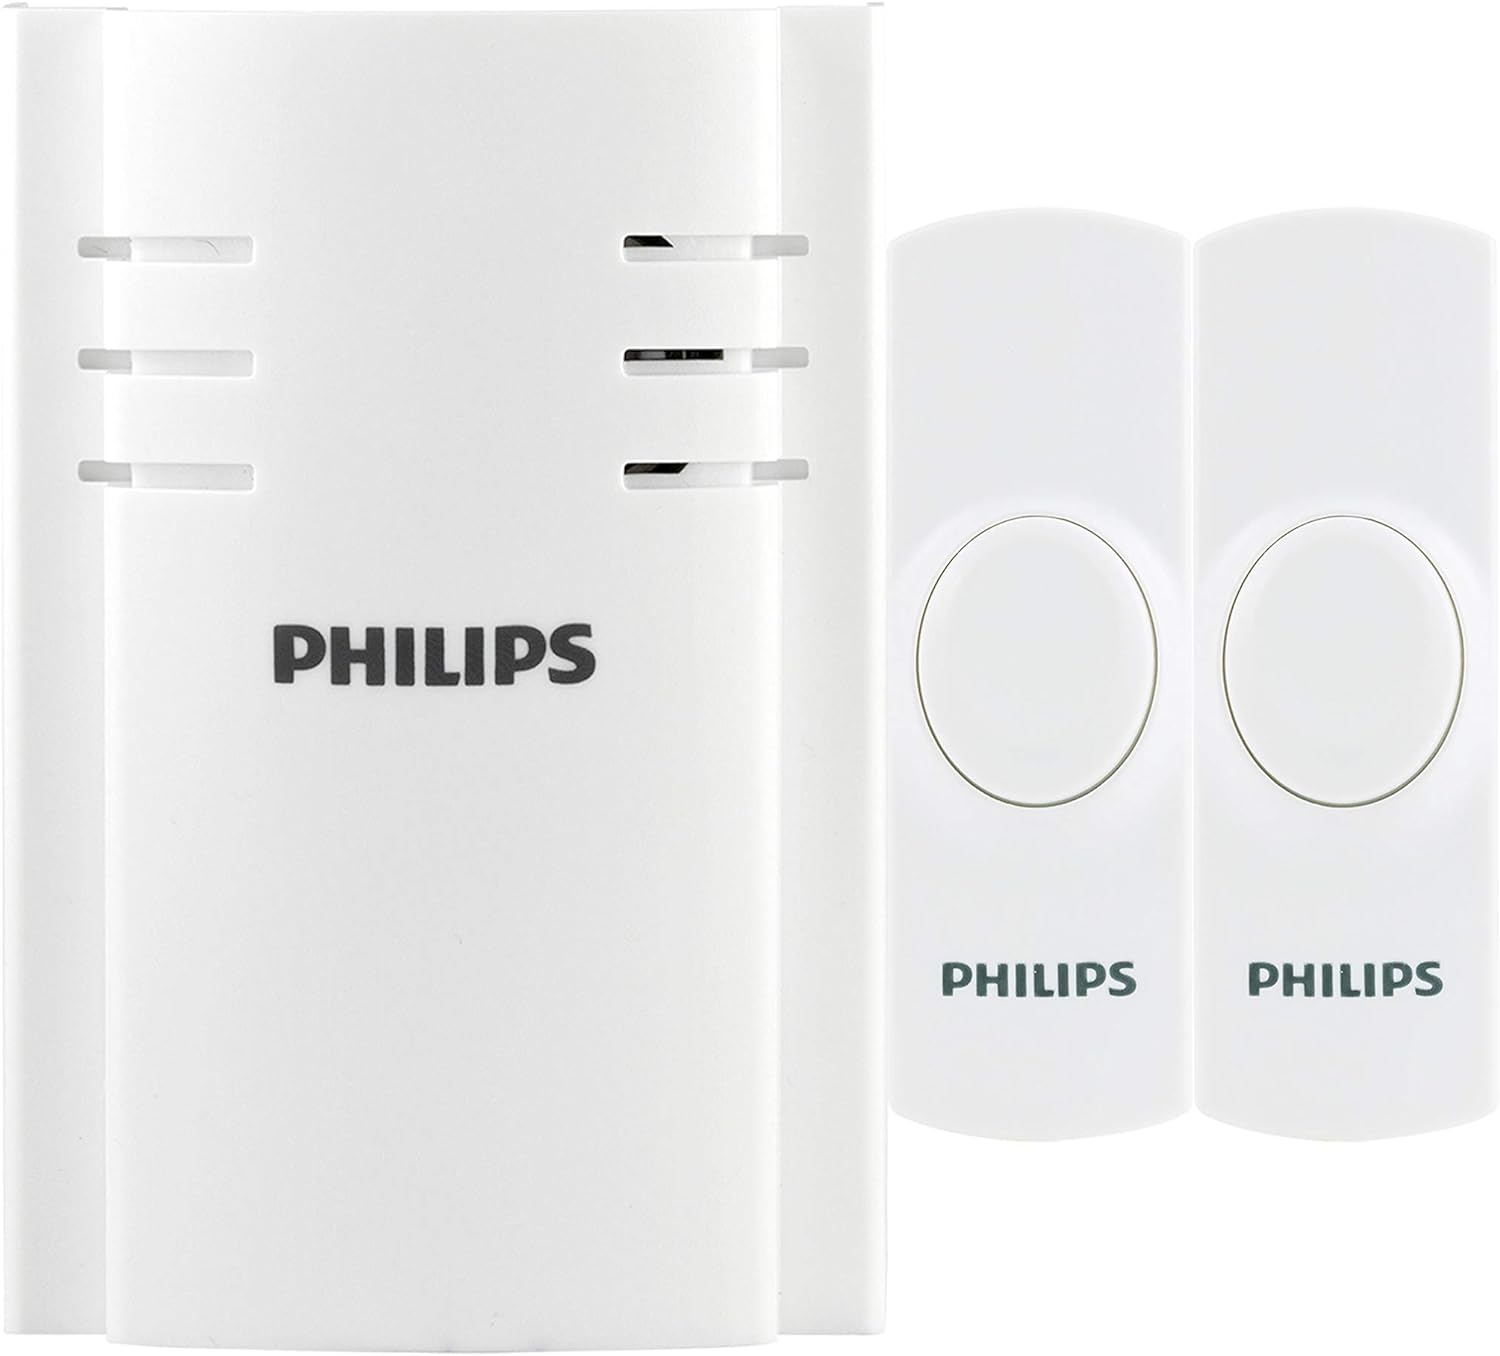 Jasco Products Company, LLC Philips Wireless Doorbell Kit, Plug-In Reciever, 2 Push Buttons, 8 Melodies, 4 Volume Levels, 150 Ft Range, White, DES2280W/27